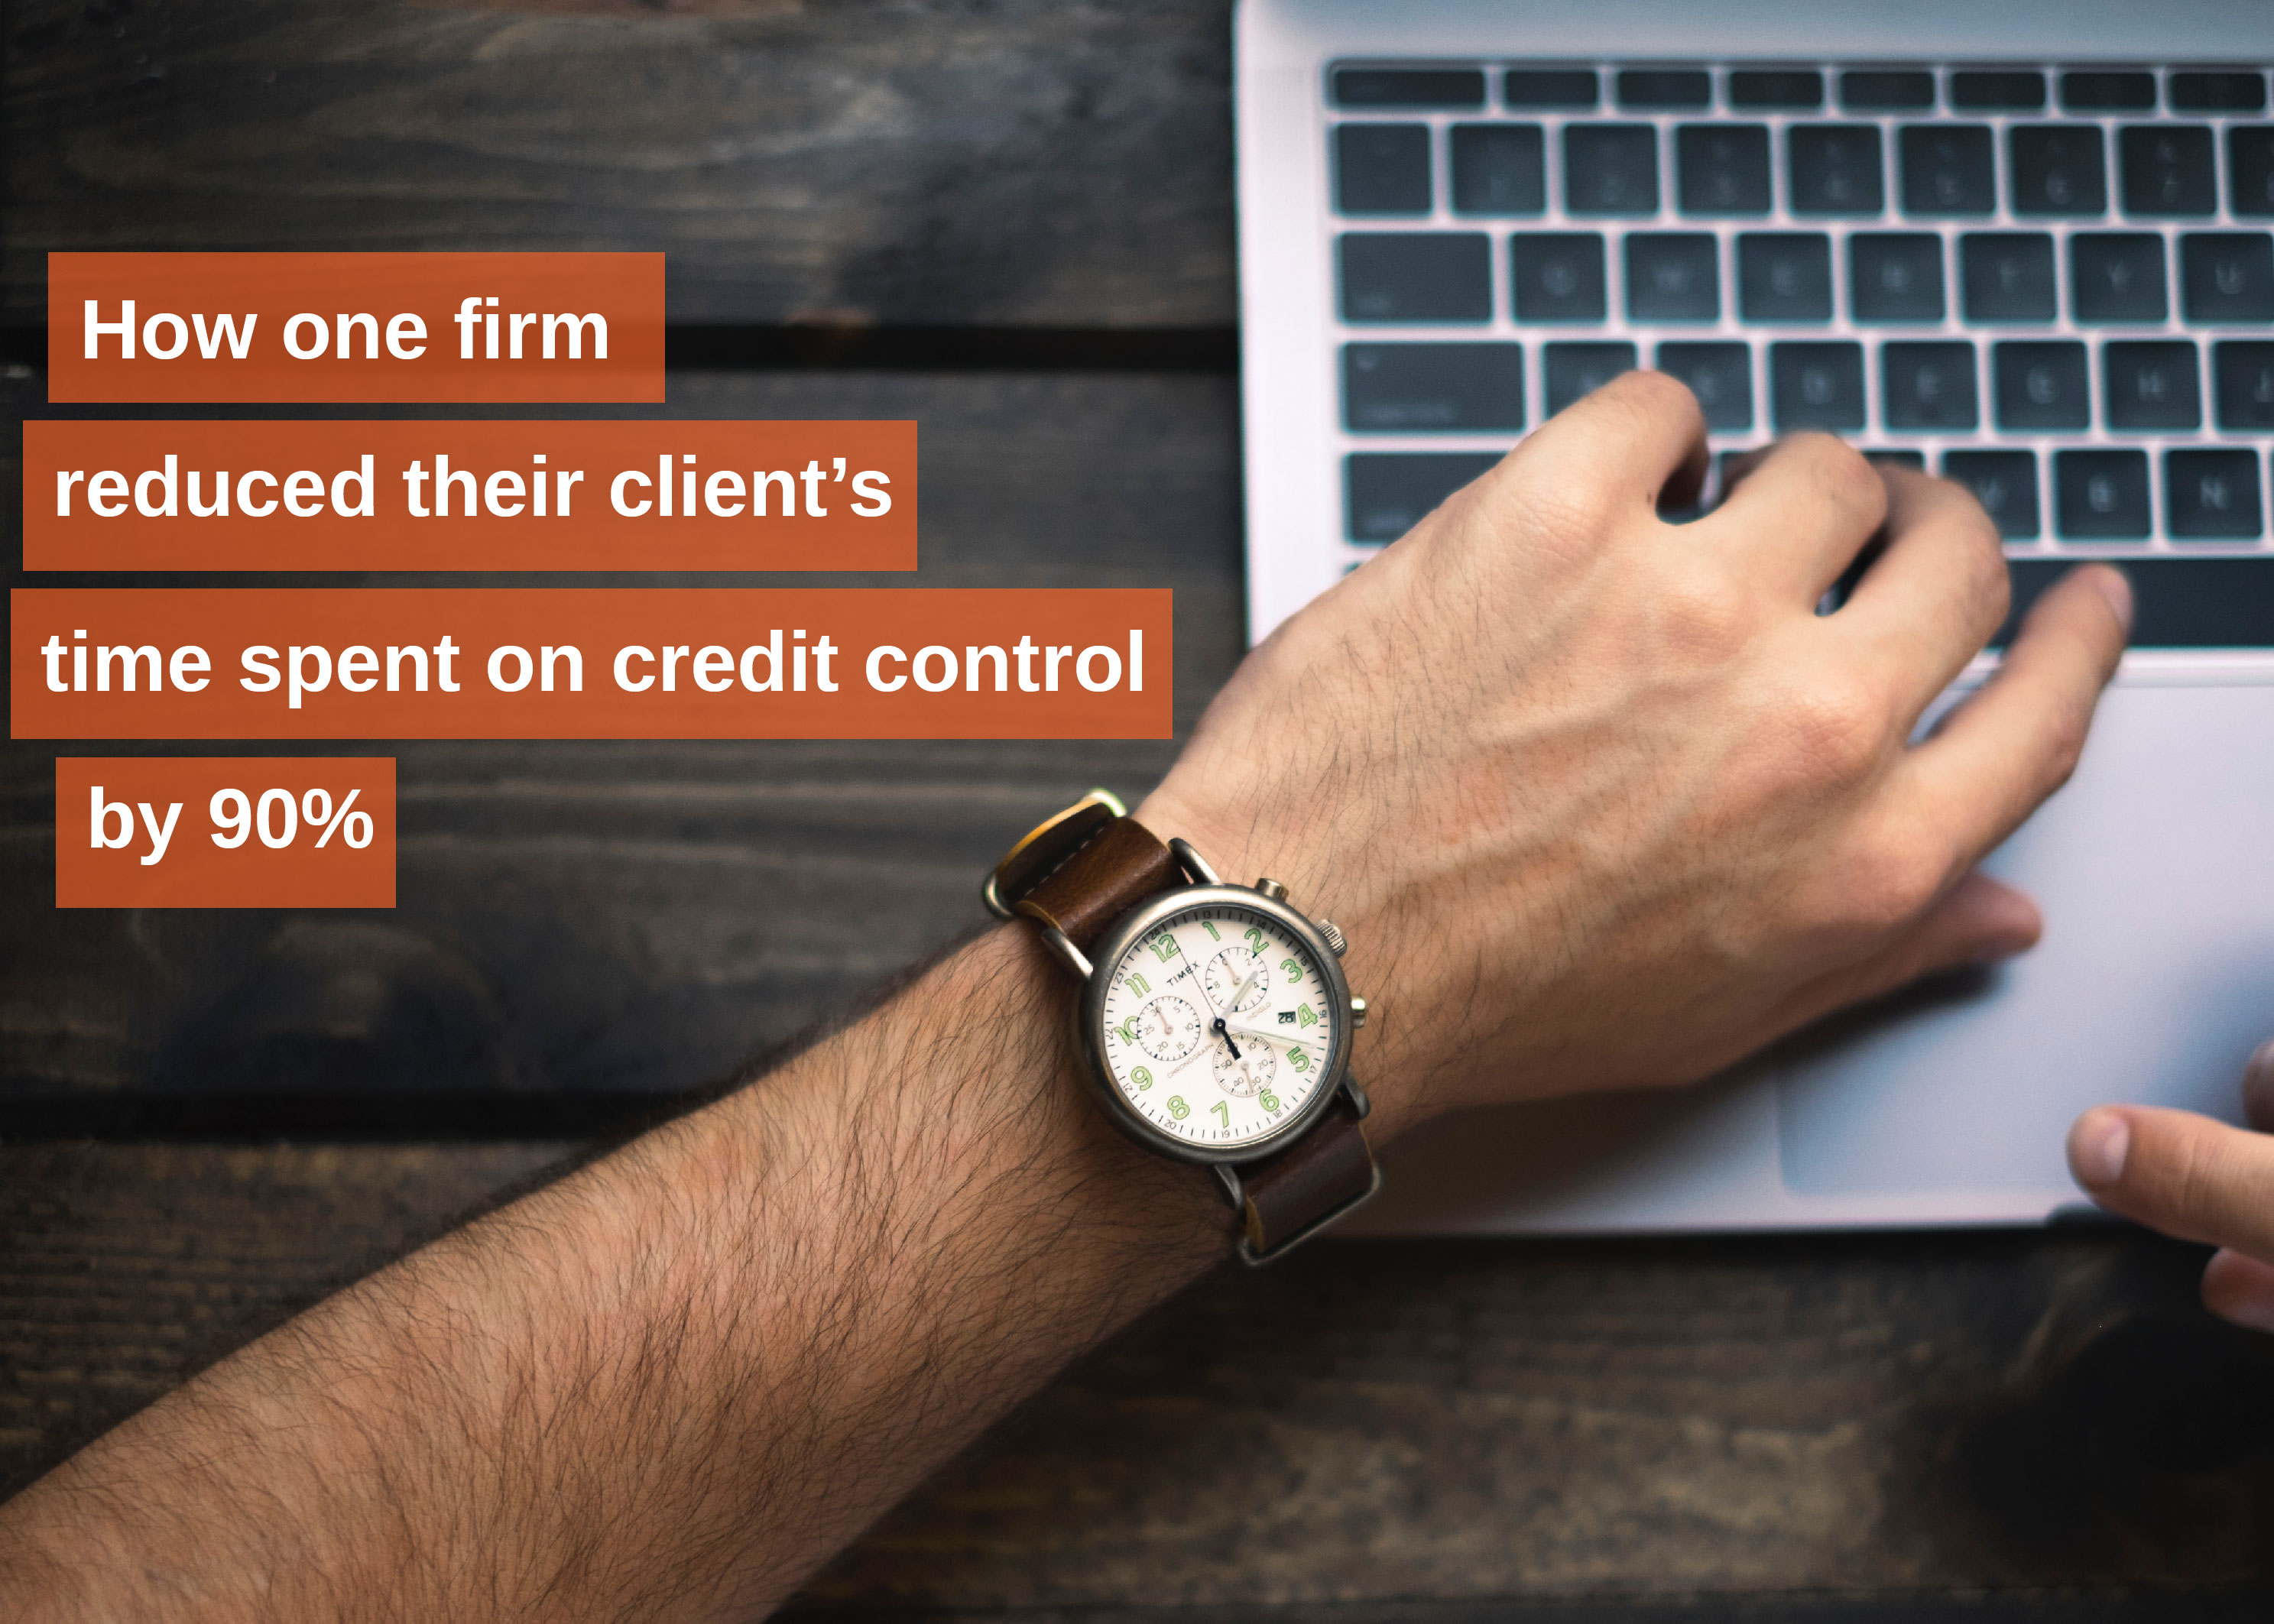 How a firm reduced time spent on credit control by 90%